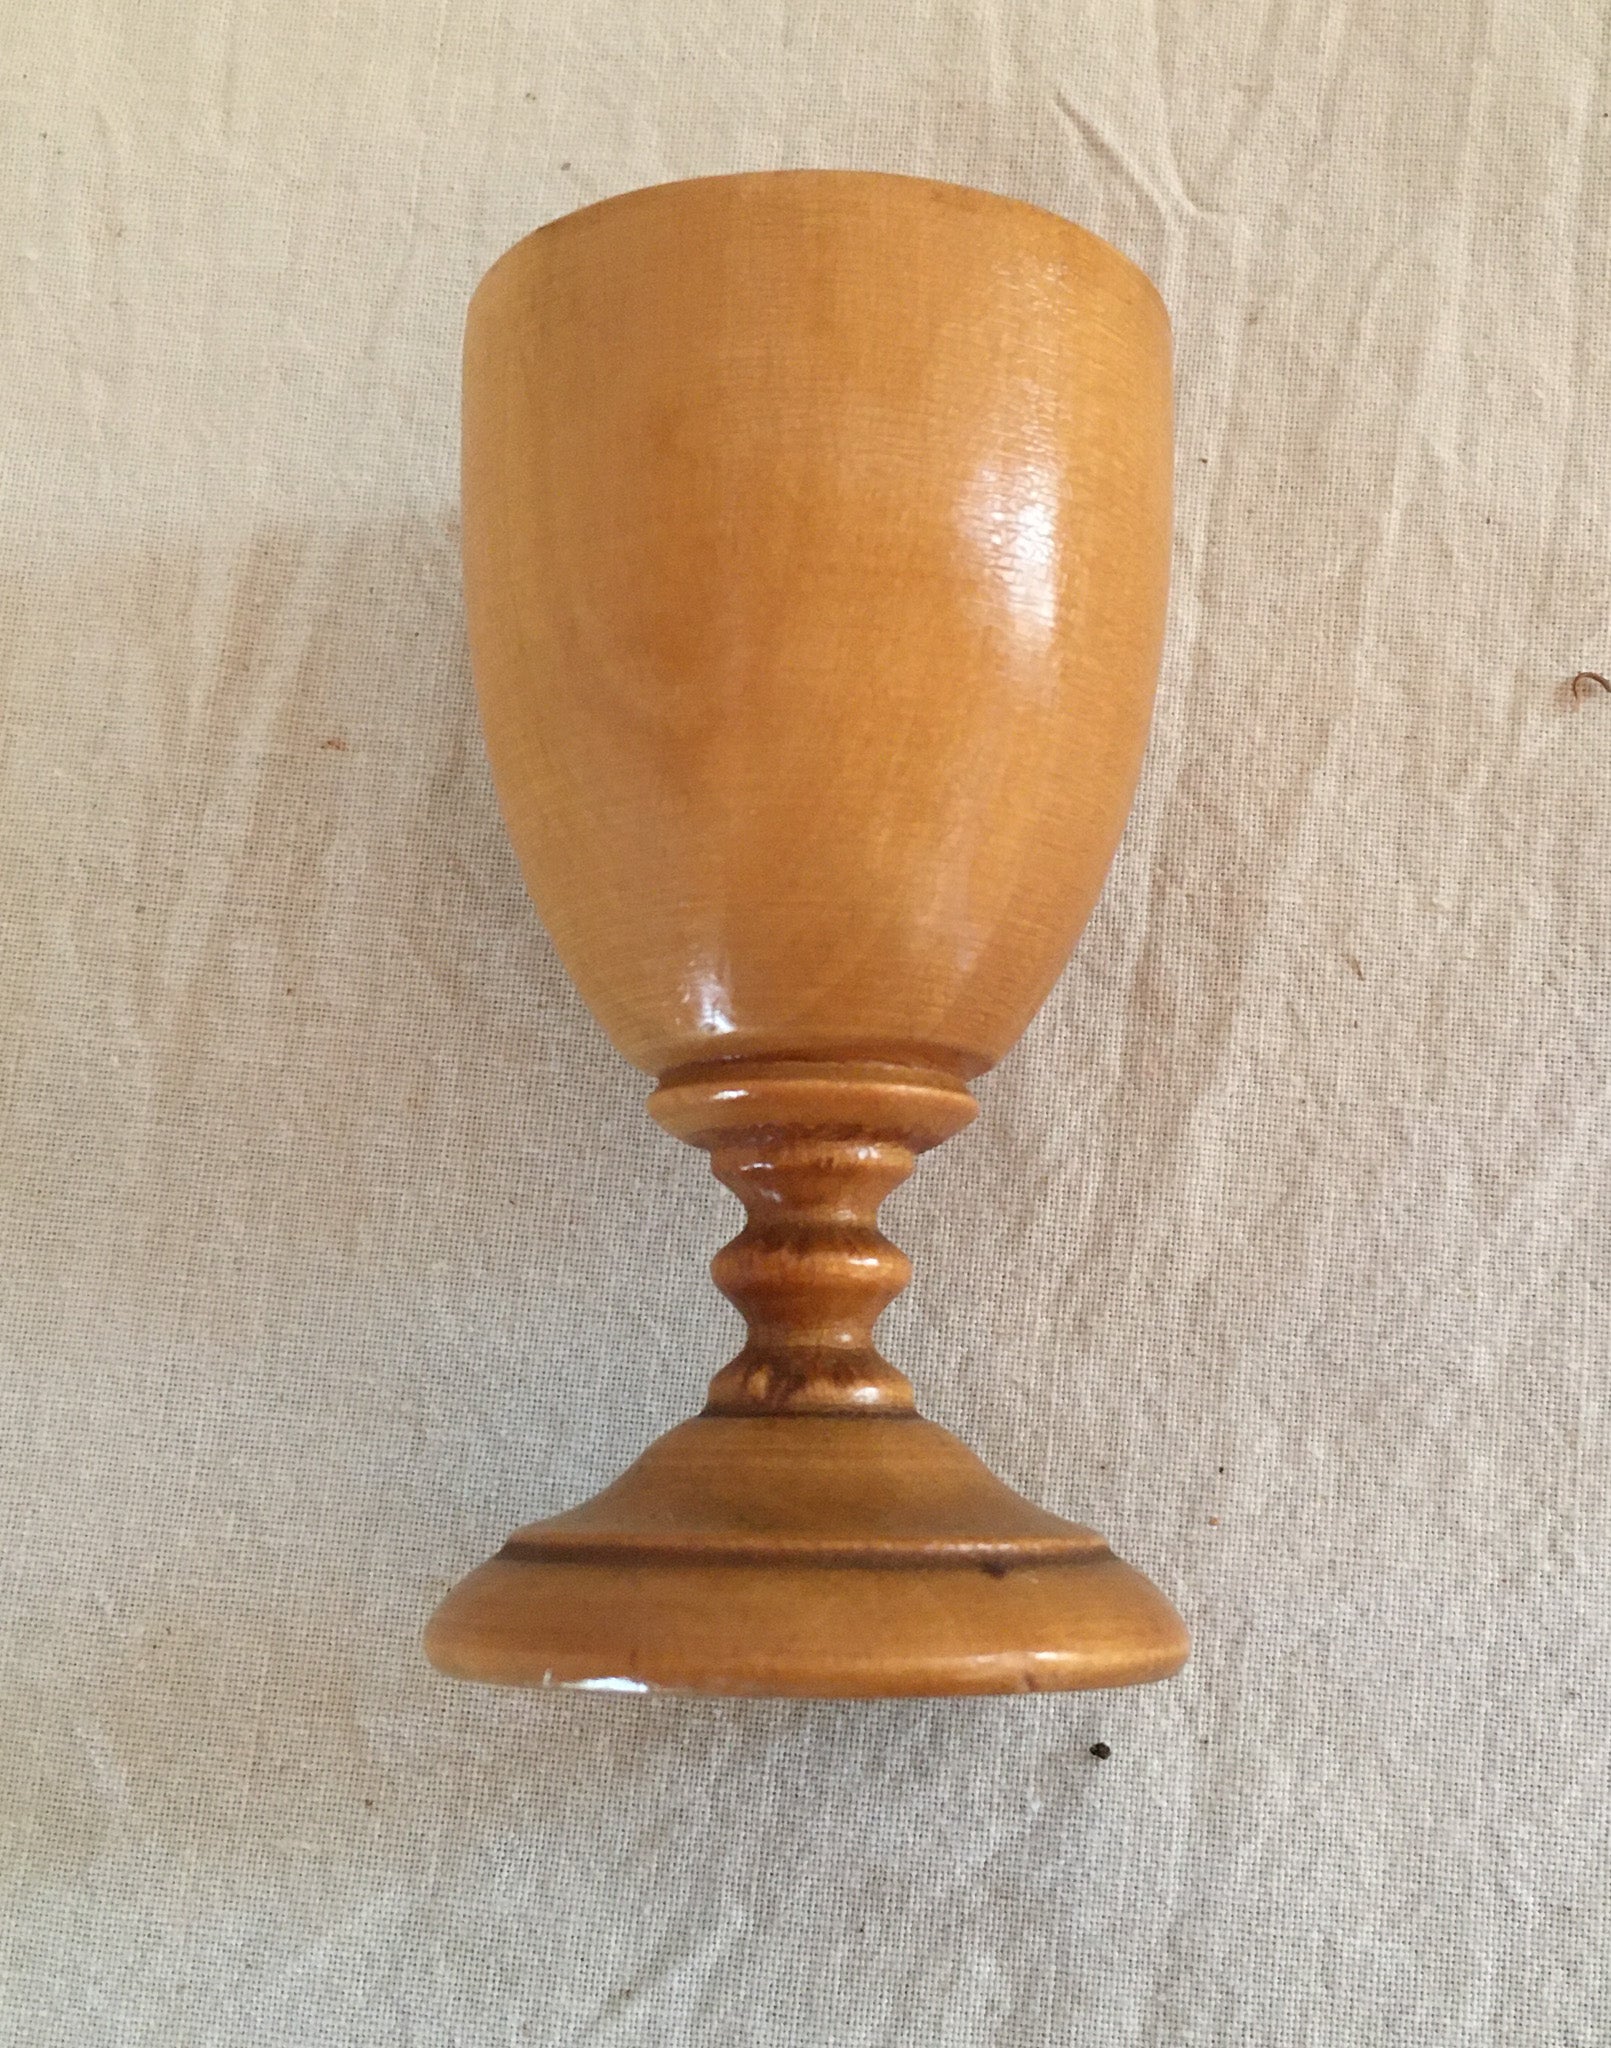 Late 1800’s Mauchline Ware Egg Cup, “Bunker Hill Monument 221 Feet High”